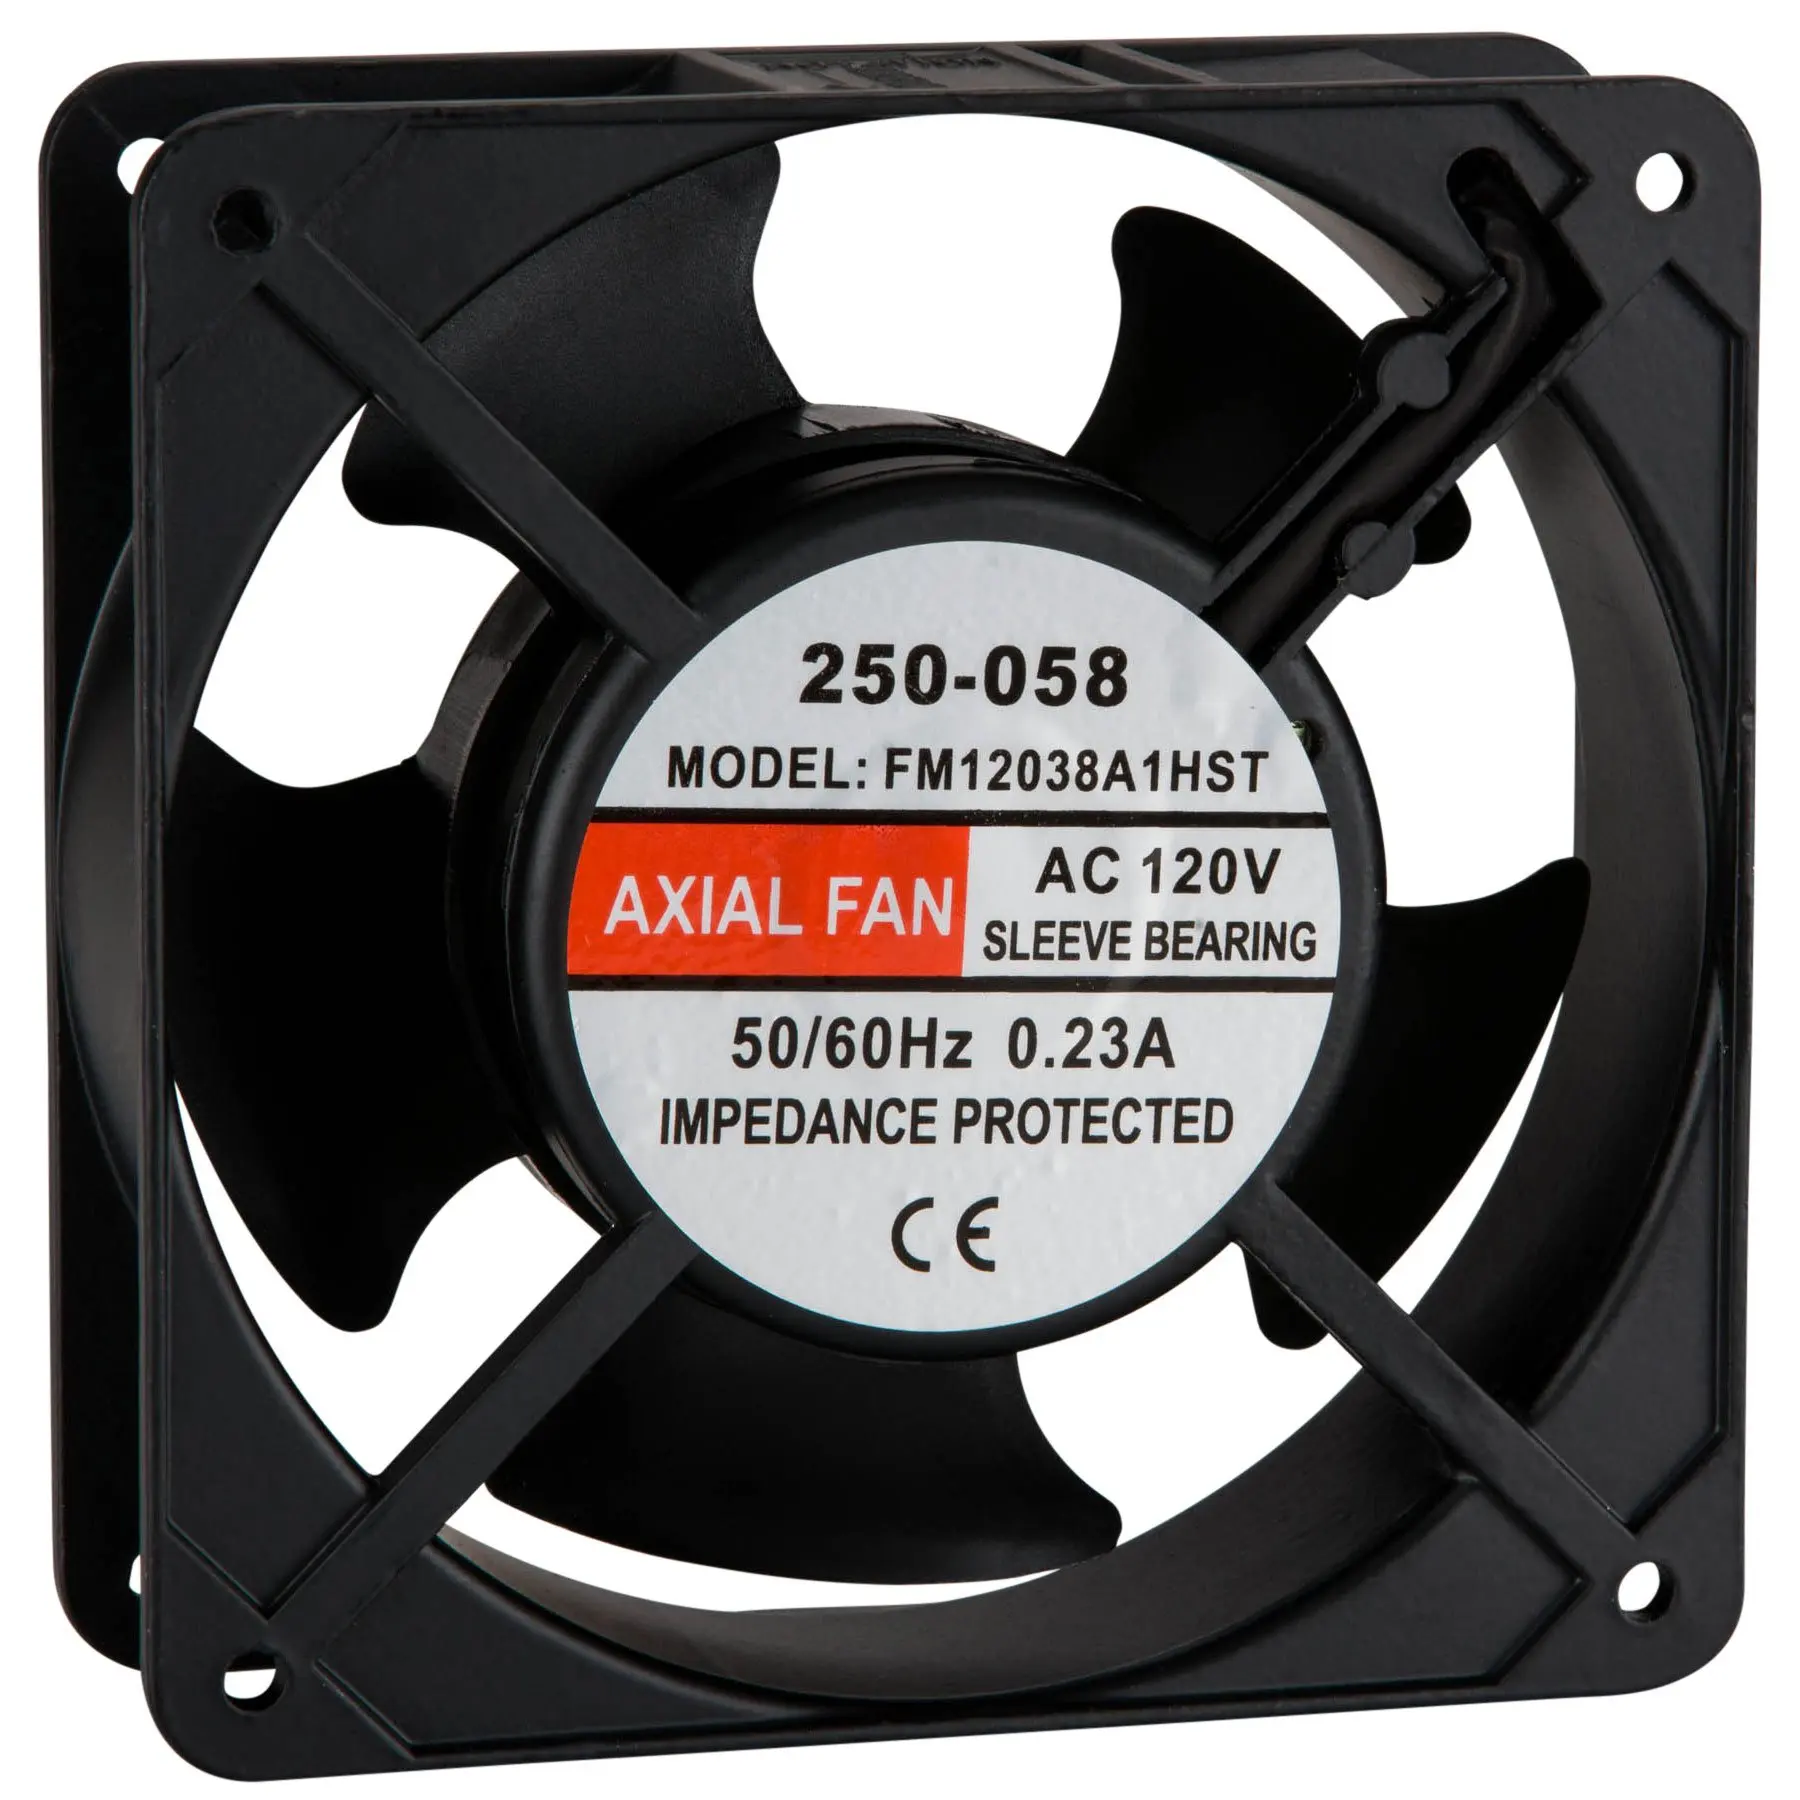 Ac fan only power consumption